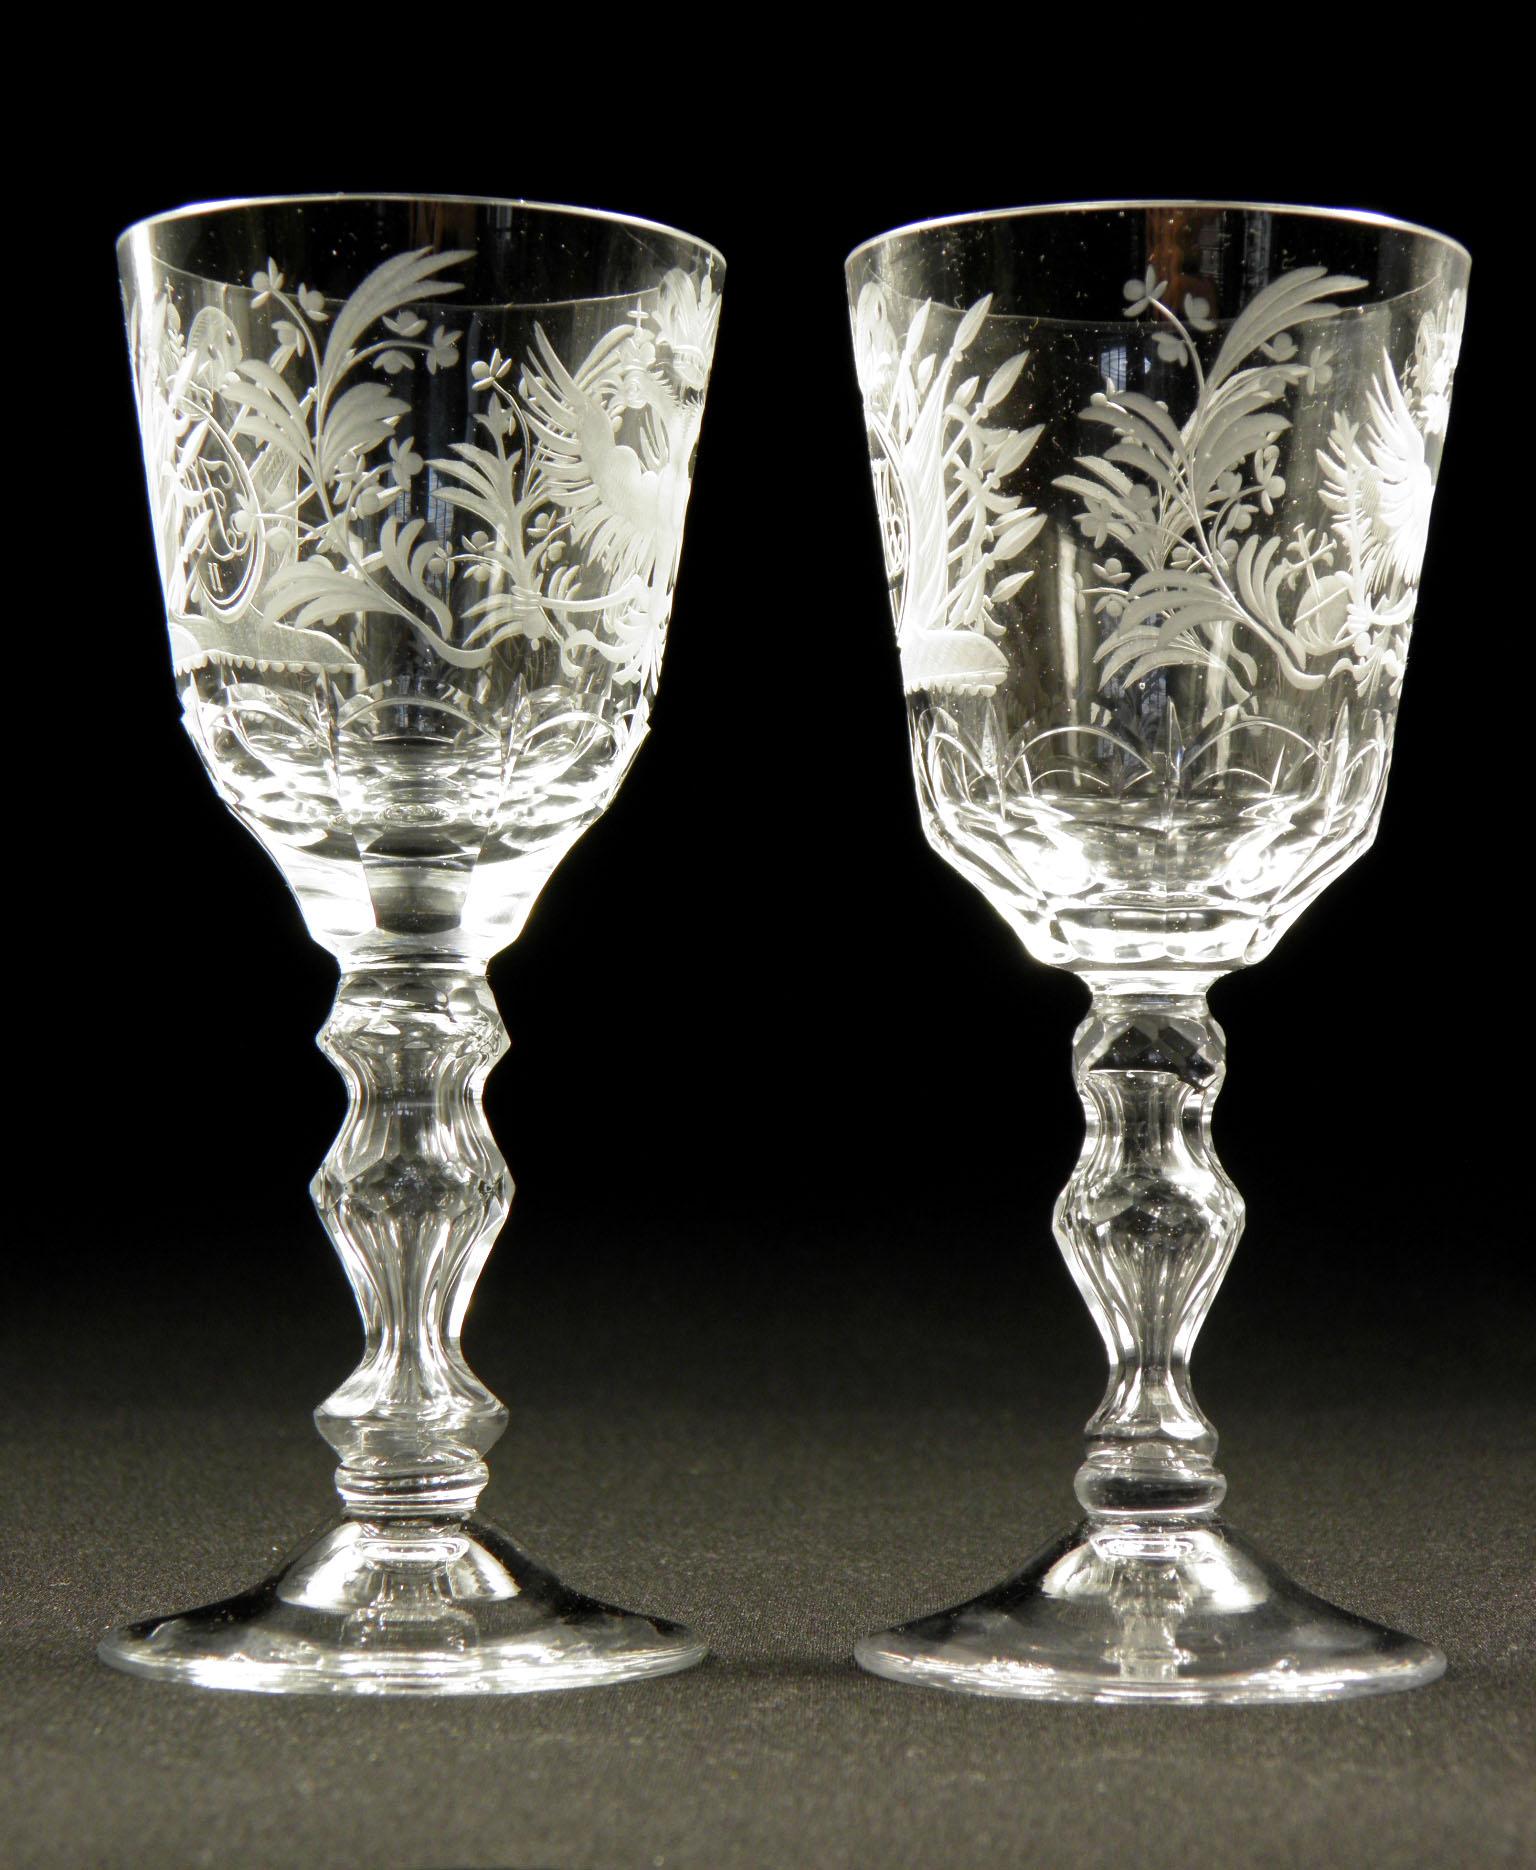 Hand-Crafted Set of 8 Pieces of Wine Glasses, Tsarist Russian Glass of the 20th Century